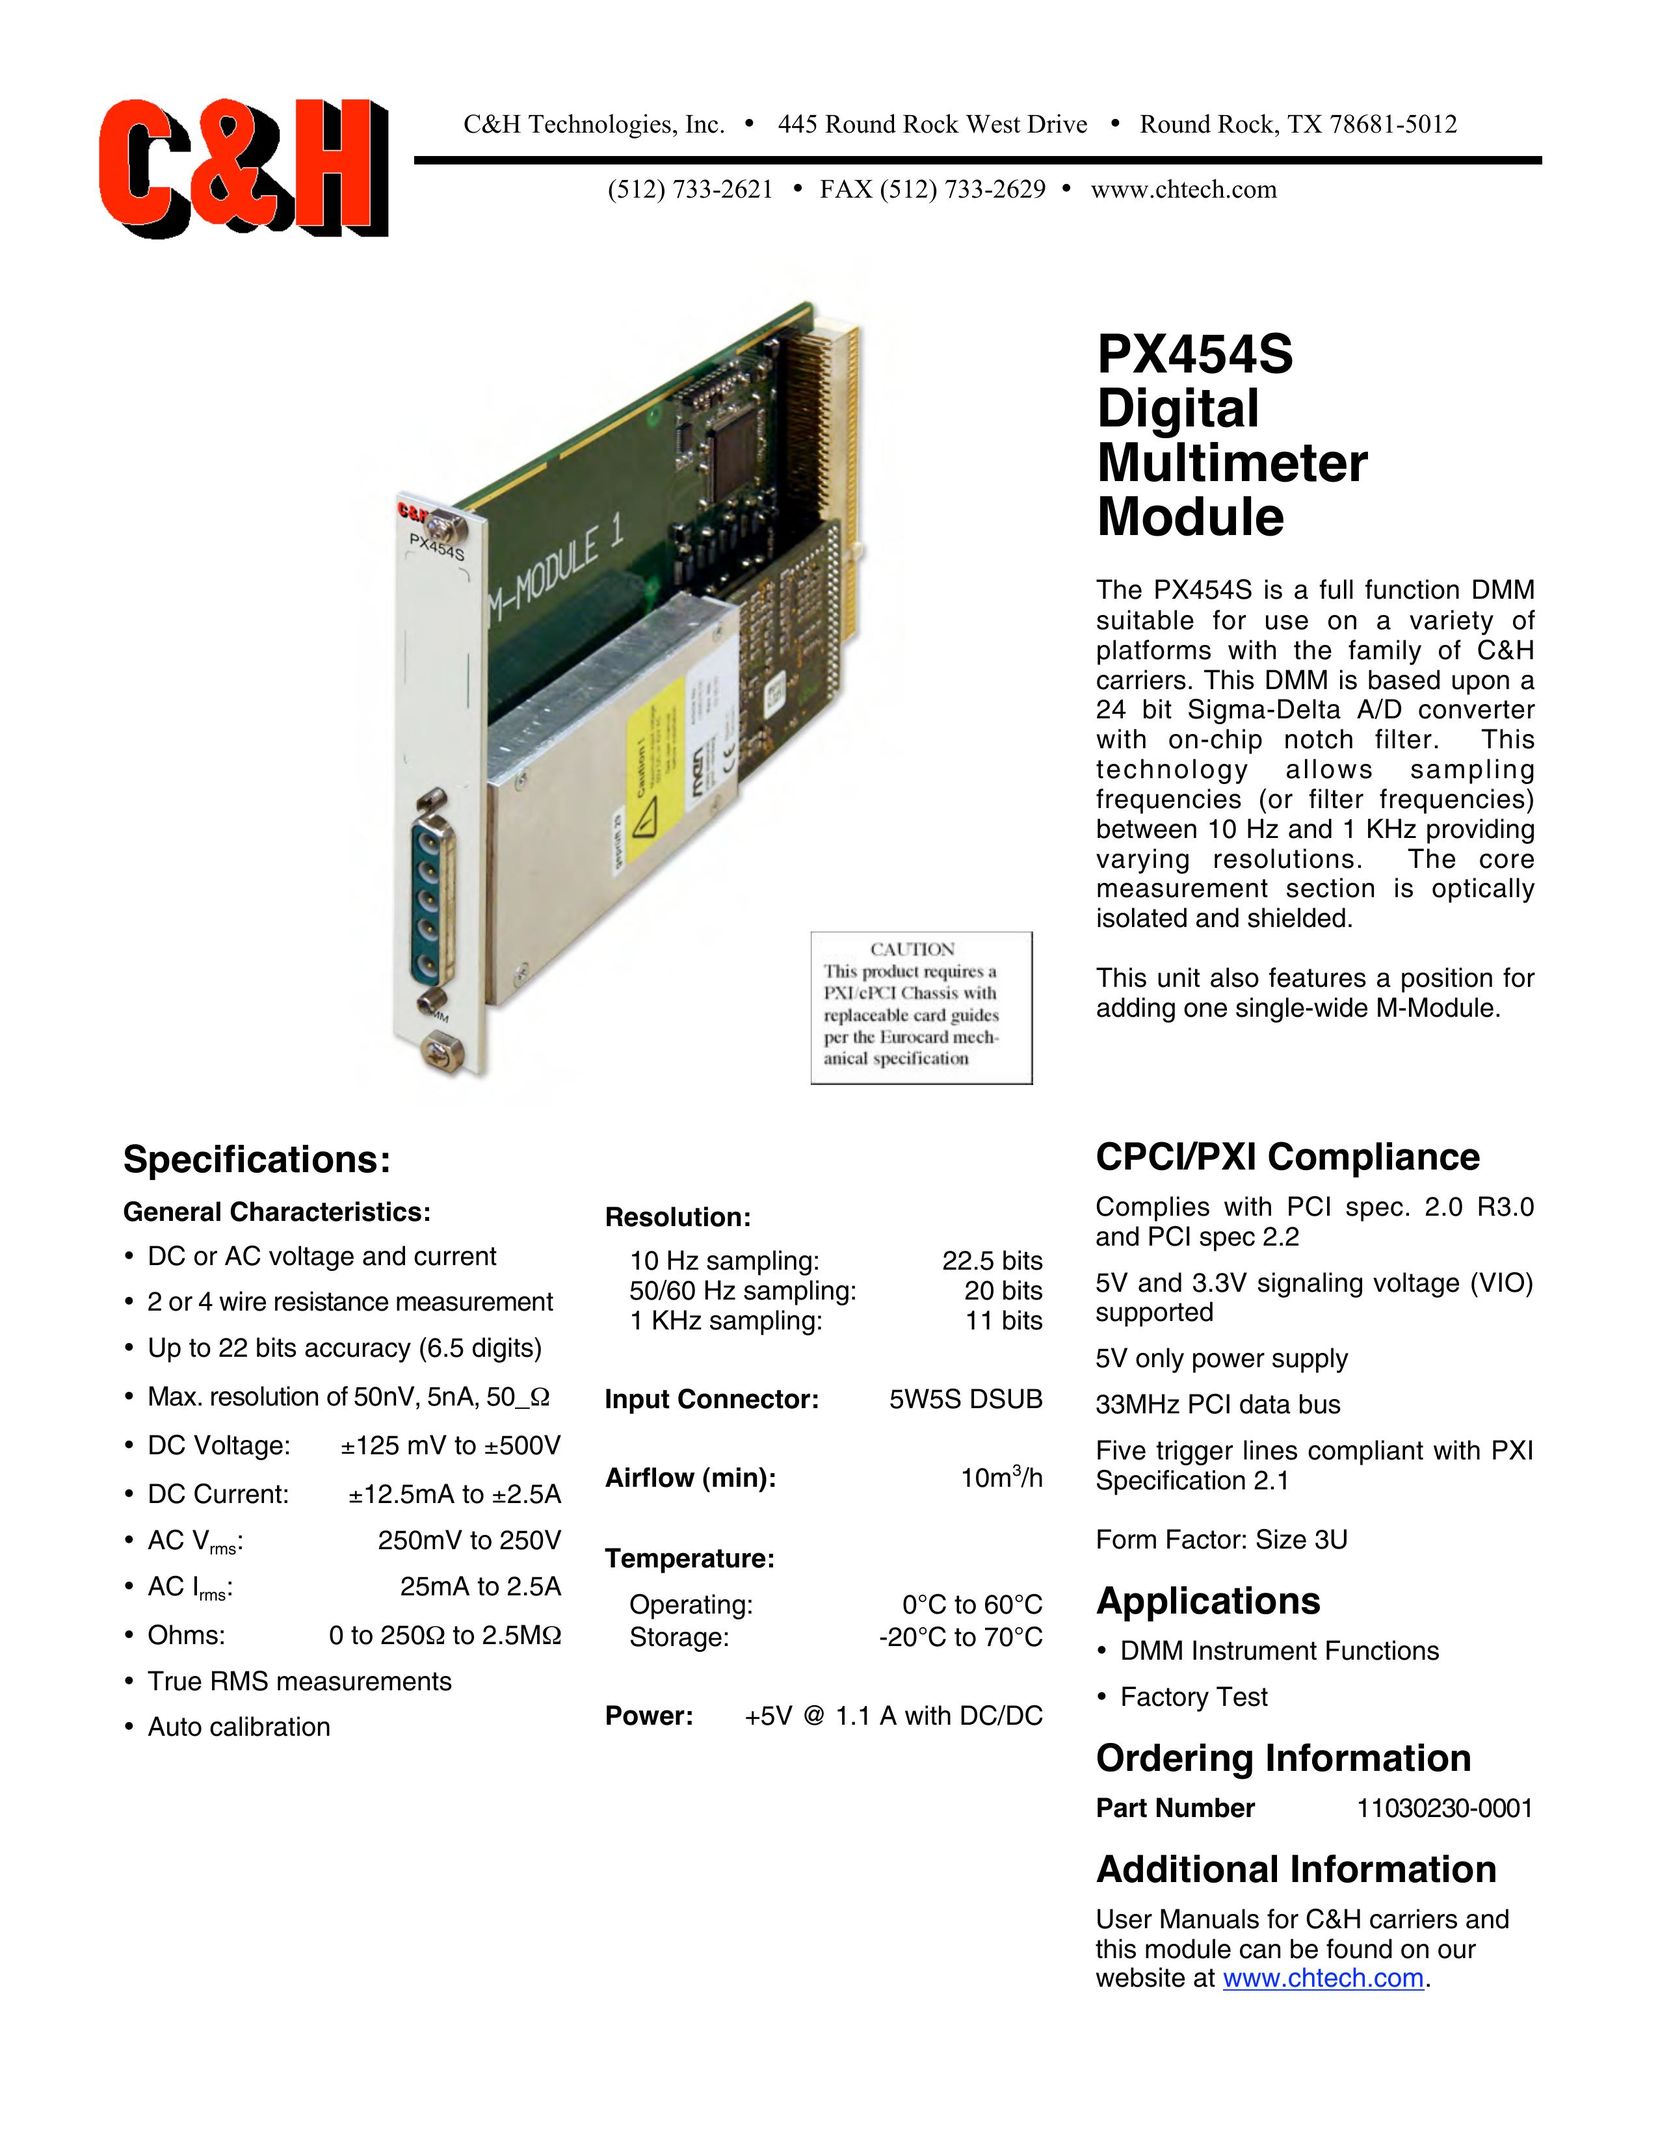 CH Tech PX454S Network Card User Manual